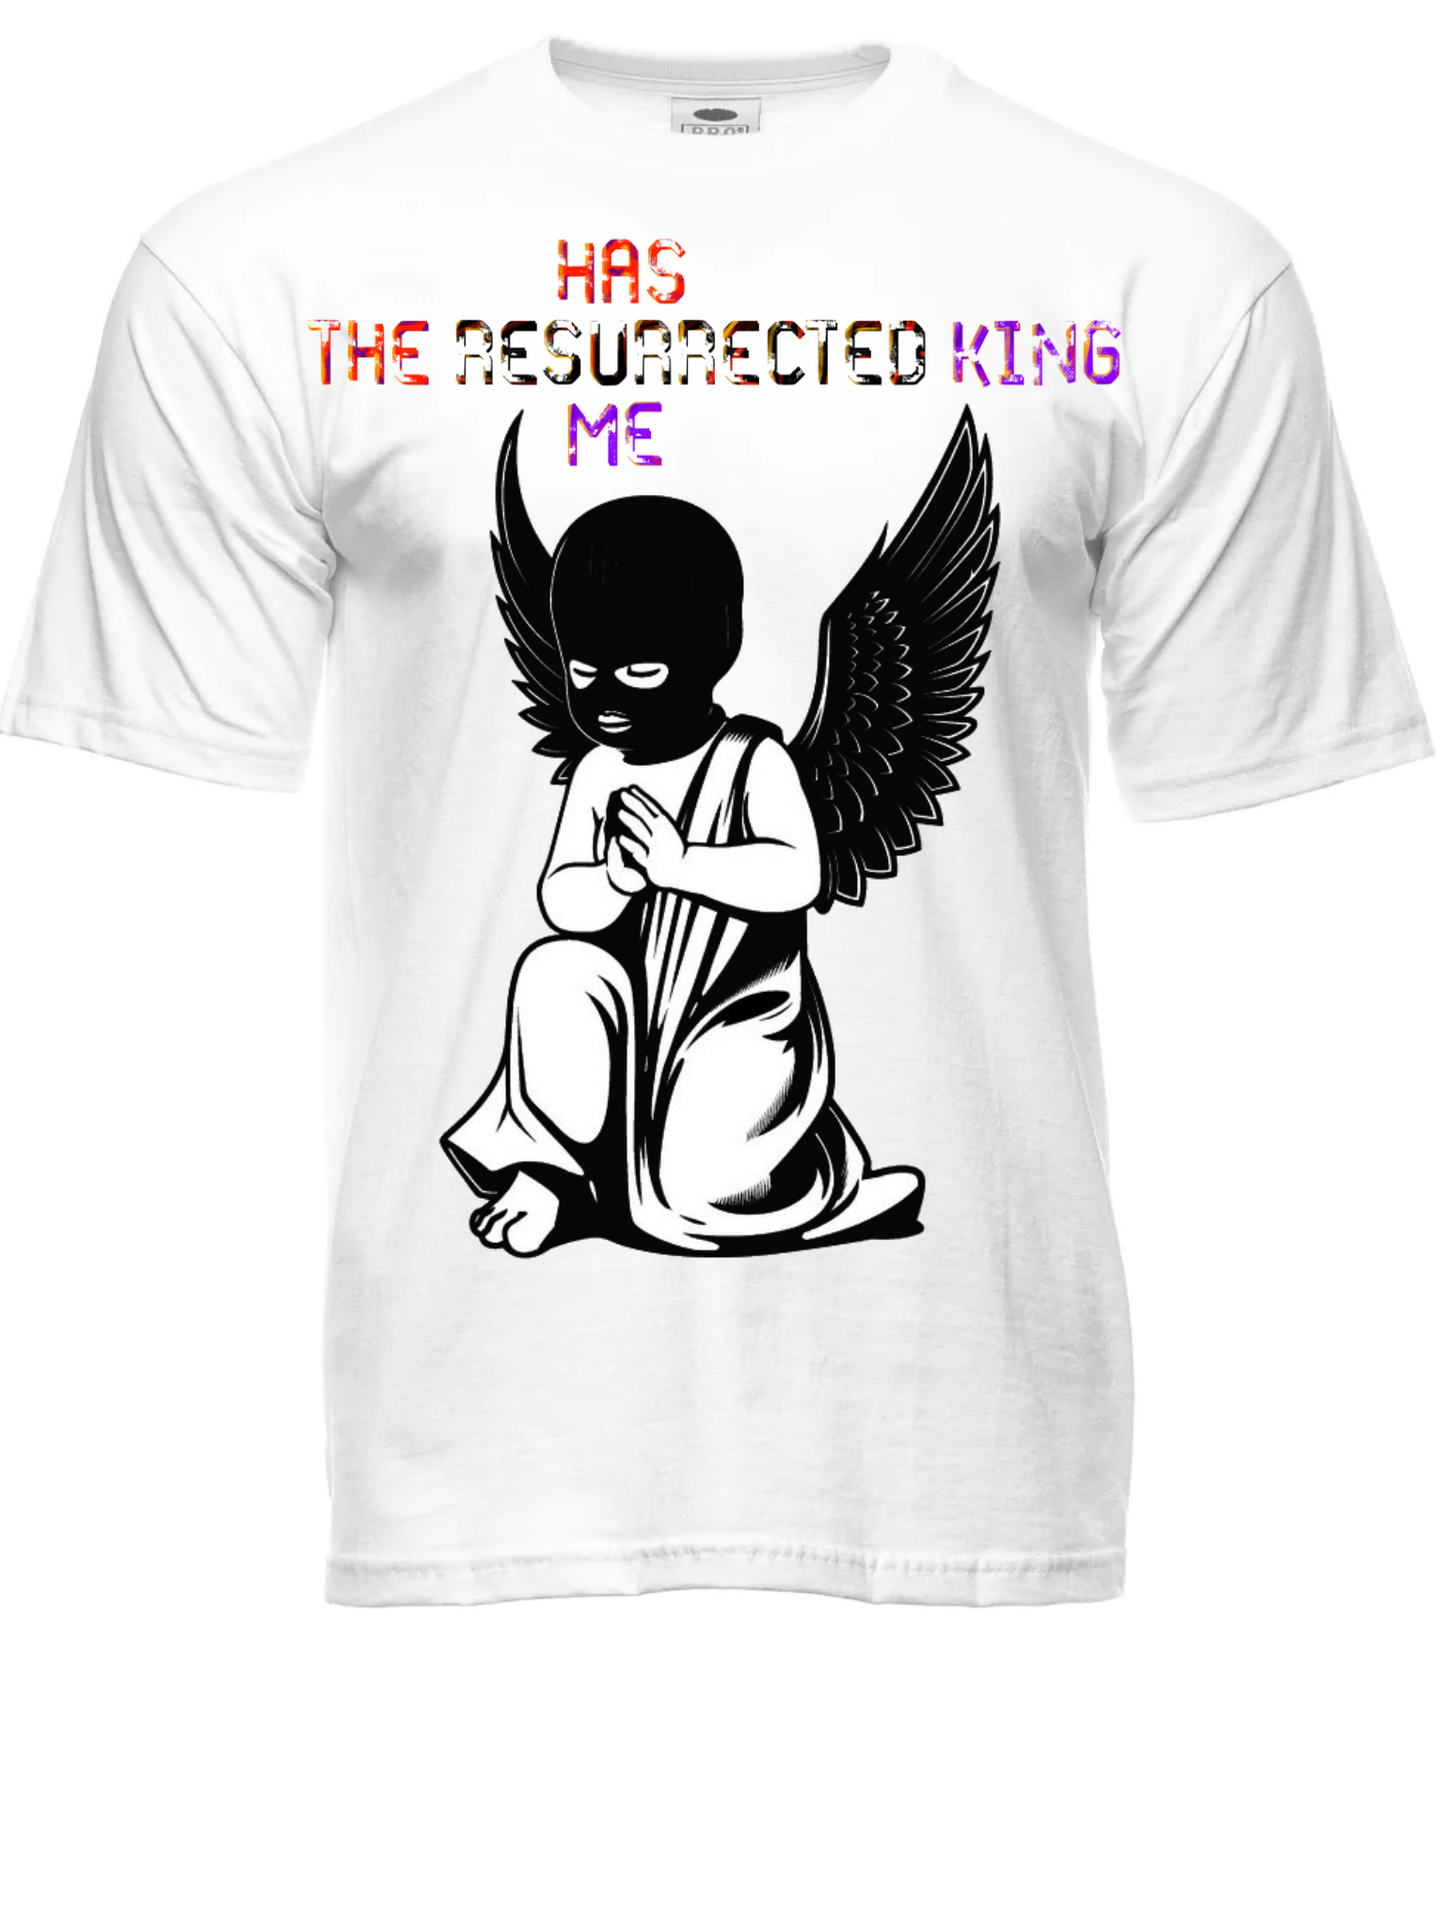 The Resurrected King